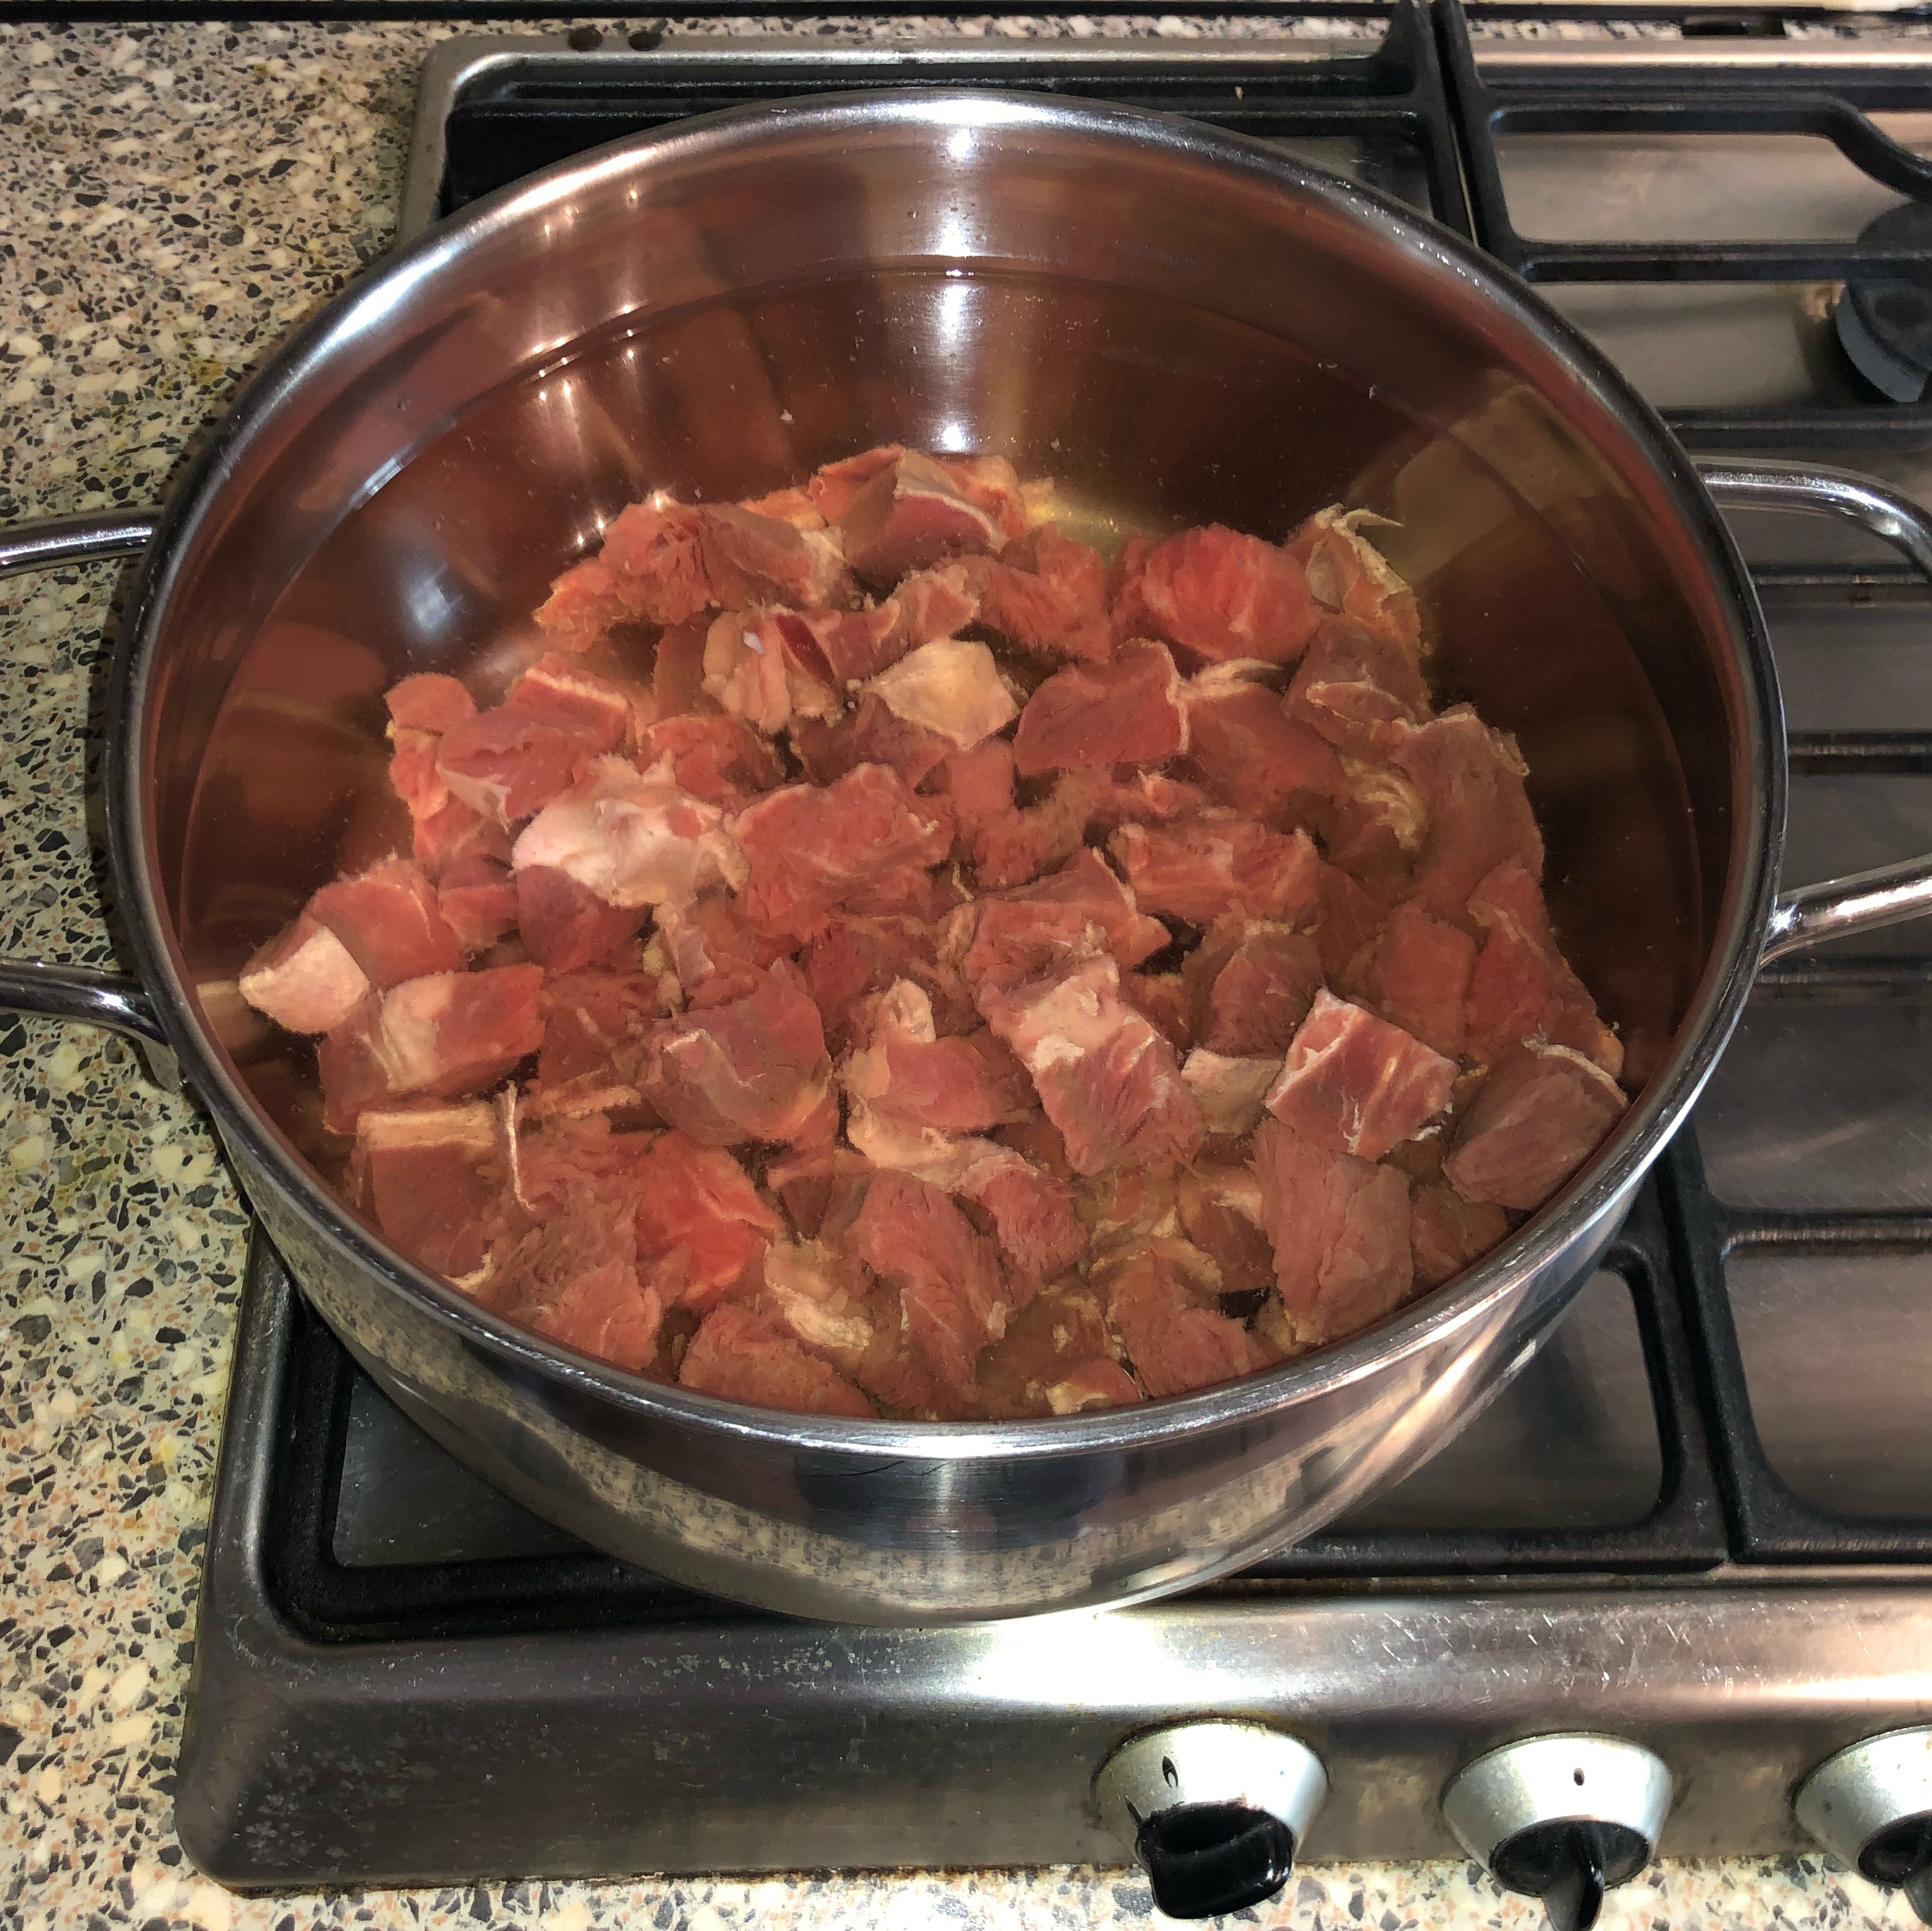 Cut the beef into small chunks, wash and combine with water in a large stockpot. Start cooking in a medium heat.